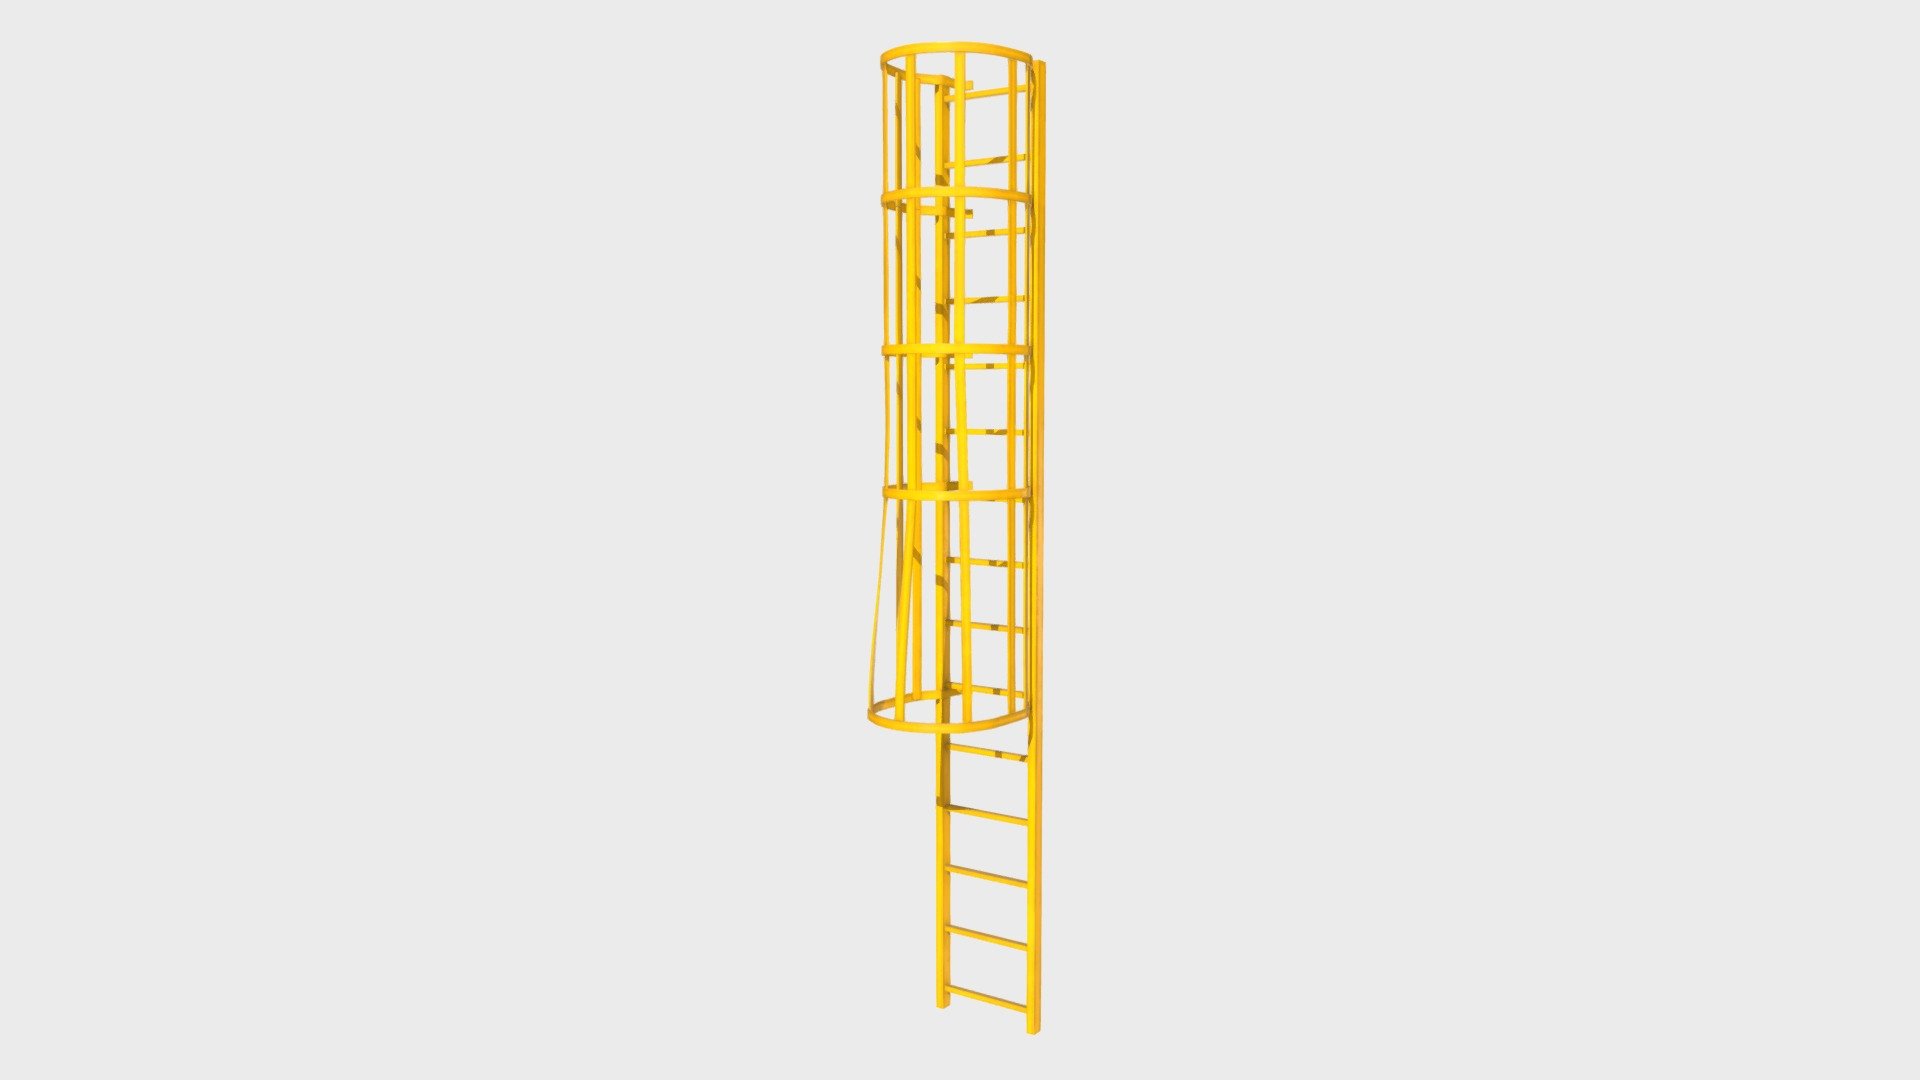 === The following description refers to the additional ZIP package provided with this model ===

Modular ladder with safety cage 3D Model. 4 individual objects (bottom cage, cage module, ladder module, bottom ladder), sharing the same non overlapping UV Layout map, Material and PBR Textures set. Production-ready 3D Model, with PBR materials, textures, non overlapping UV Layout map provided in the package.

Quads only geometries (no tris/ngons).

Formats included: FBX, OBJ; scenes: BLEND (with Cycles / Eevee PBR Materials and Textures); other: 16-bit PNGs with Alpha.

4 Objects (meshes), 1 PBR Material, UV unwrapped (non overlapping UV Layout map provided in the package); UV-mapped Textures.

UV Layout maps and Image Textures resolutions: 2048x2048; PBR Textures made with Substance Painter.

Polygonal, QUADS ONLY (no tris/ngons); 20858 vertices, 20842 quad faces (41684 tris).

Real world dimensions; scene scale units: cm in Blender 3.6.1 LTS (that is: Metric with 0.01 scale) 3d model